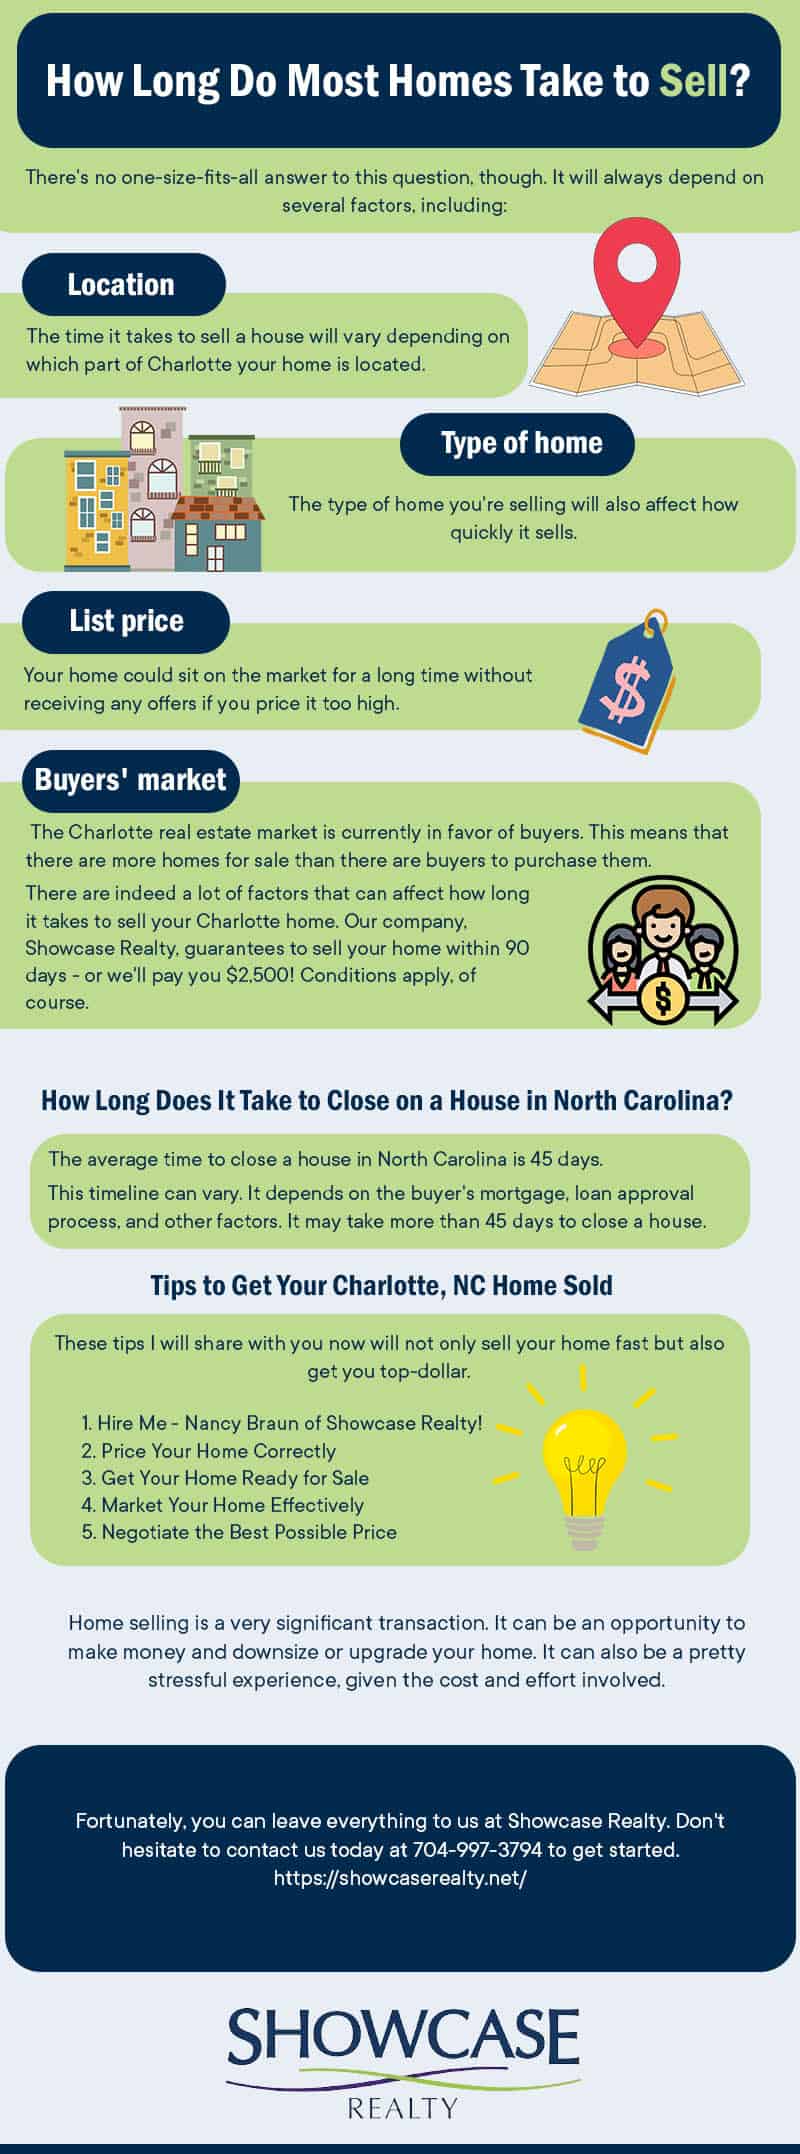 Top Real Estate Agent in Charlotte NC - Leave everything you need to do in a home-selling process to Nancy Braun of Showcase Realty by calling 704-997-3794 today.